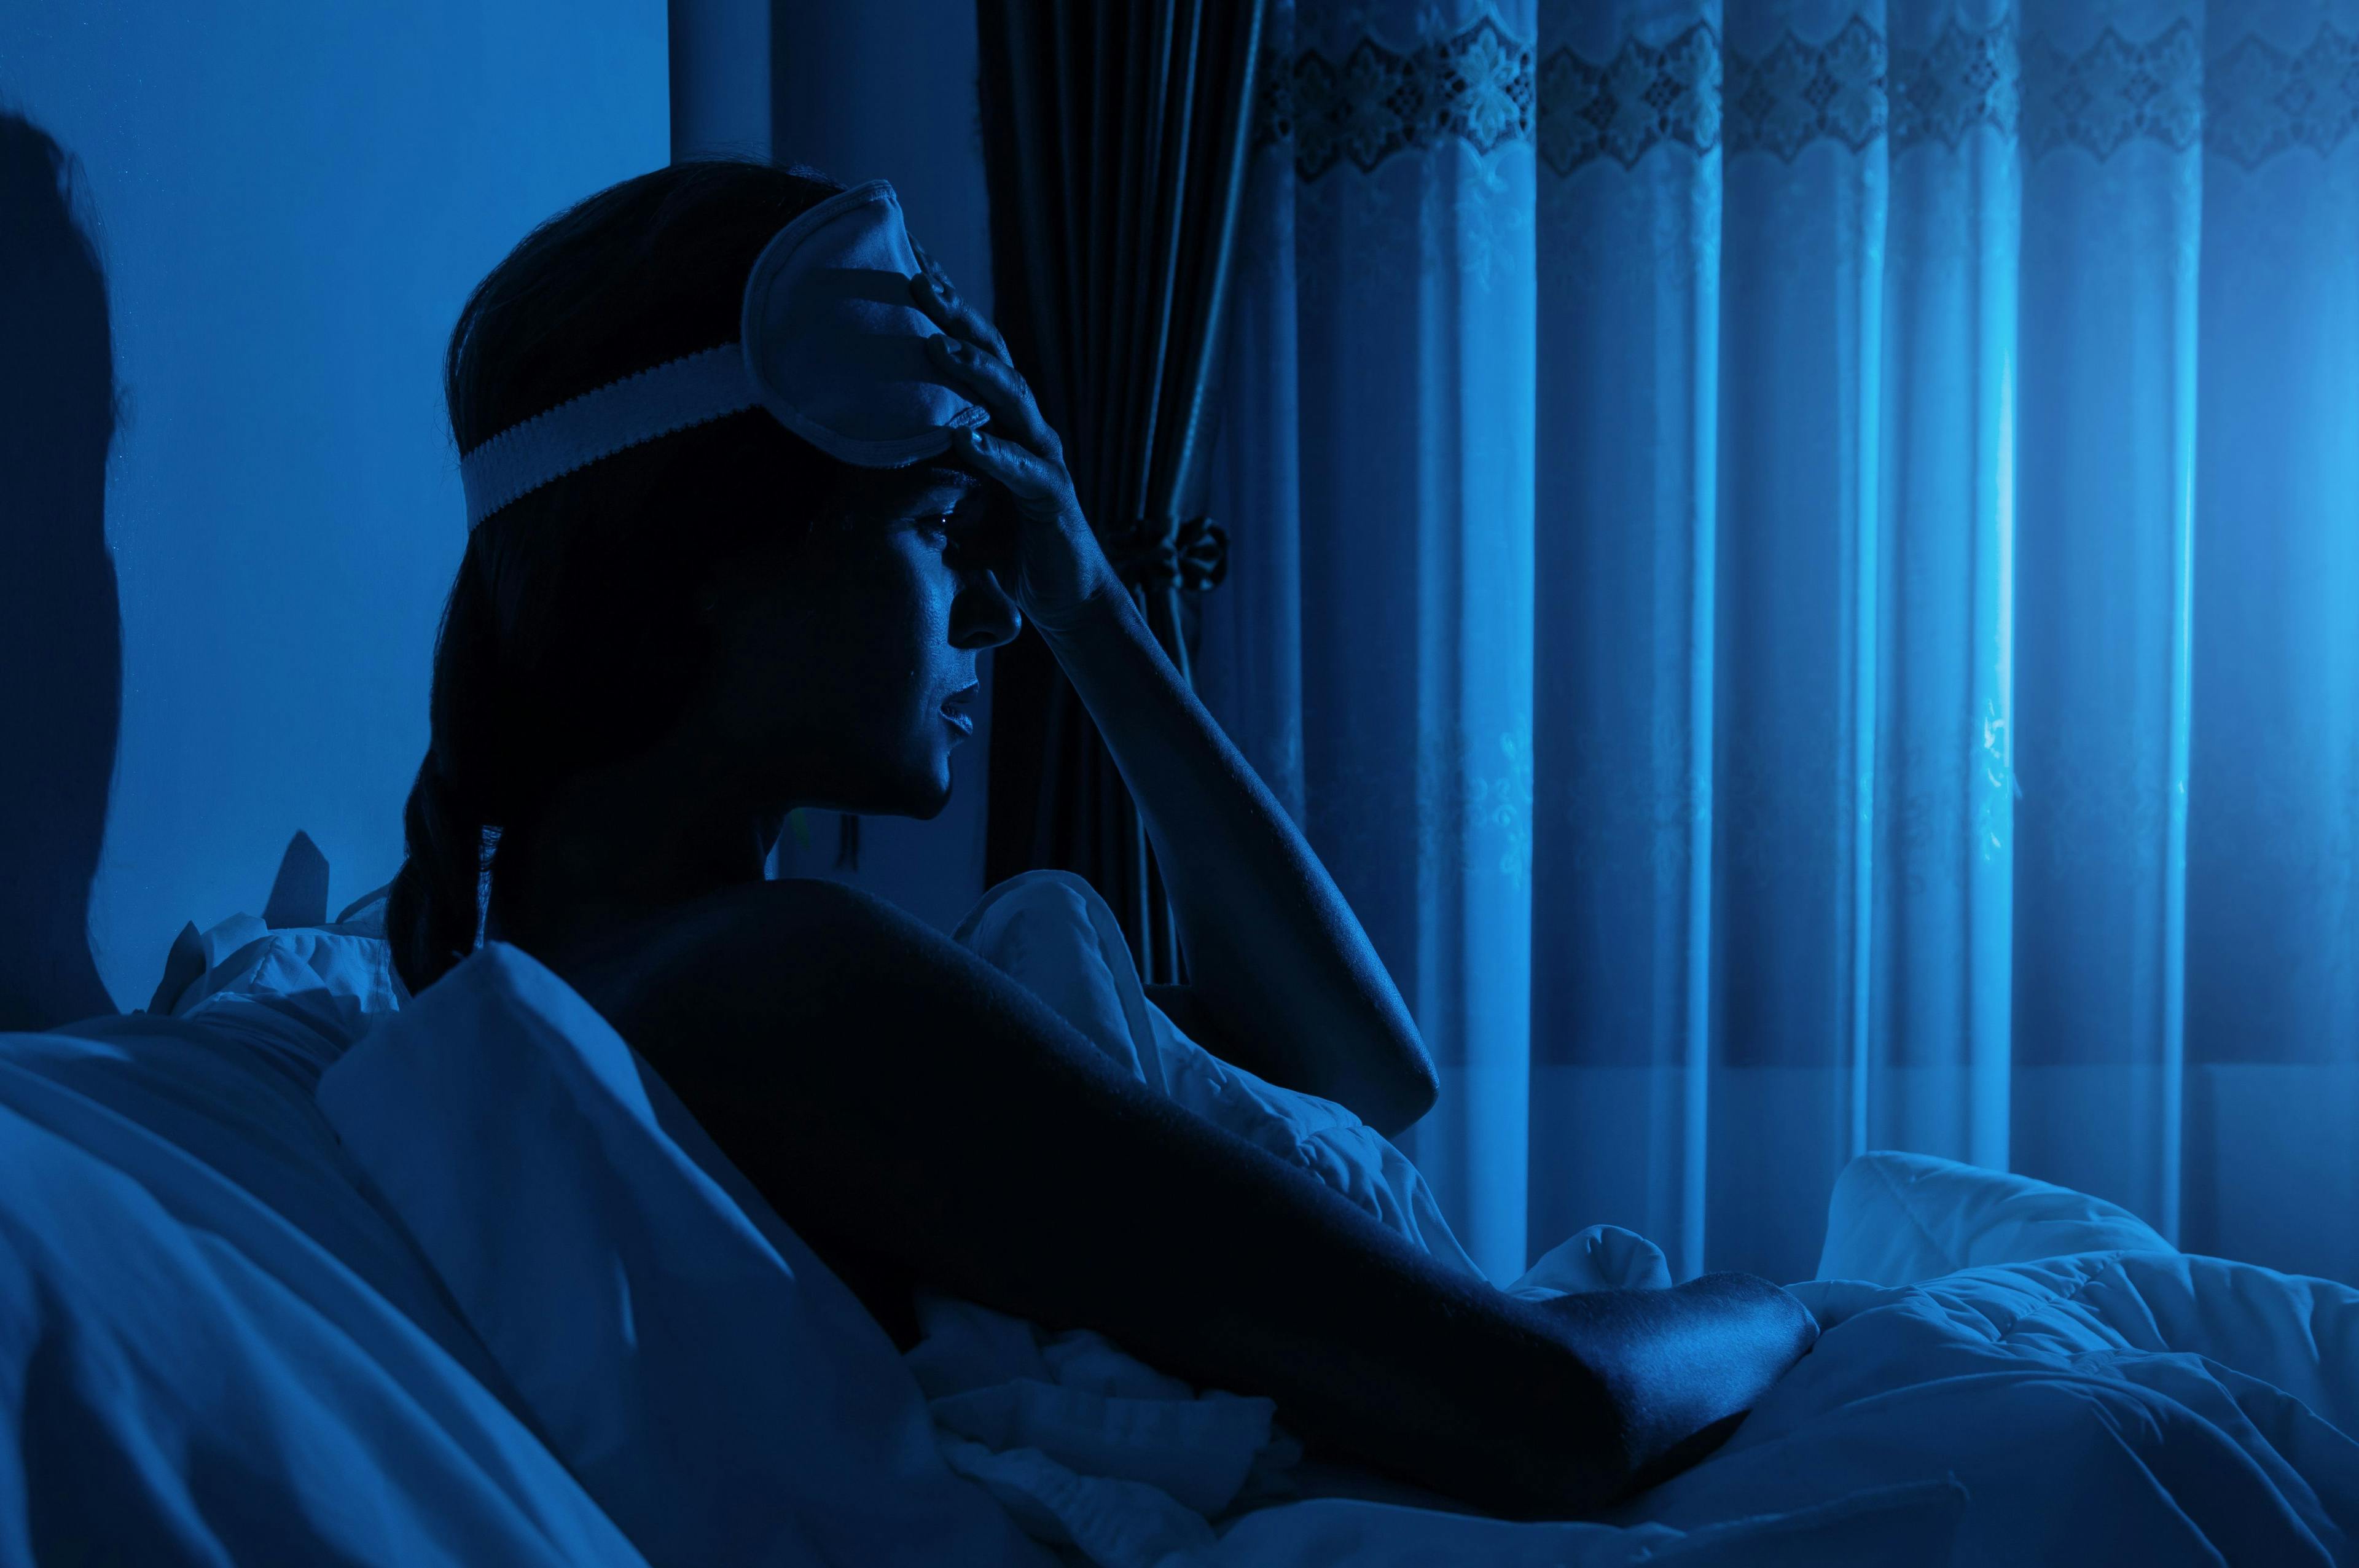 Researchers investigated relationships between sleep problems, suicidal ideation, and psychopathology in patients with first-episode psychosis.